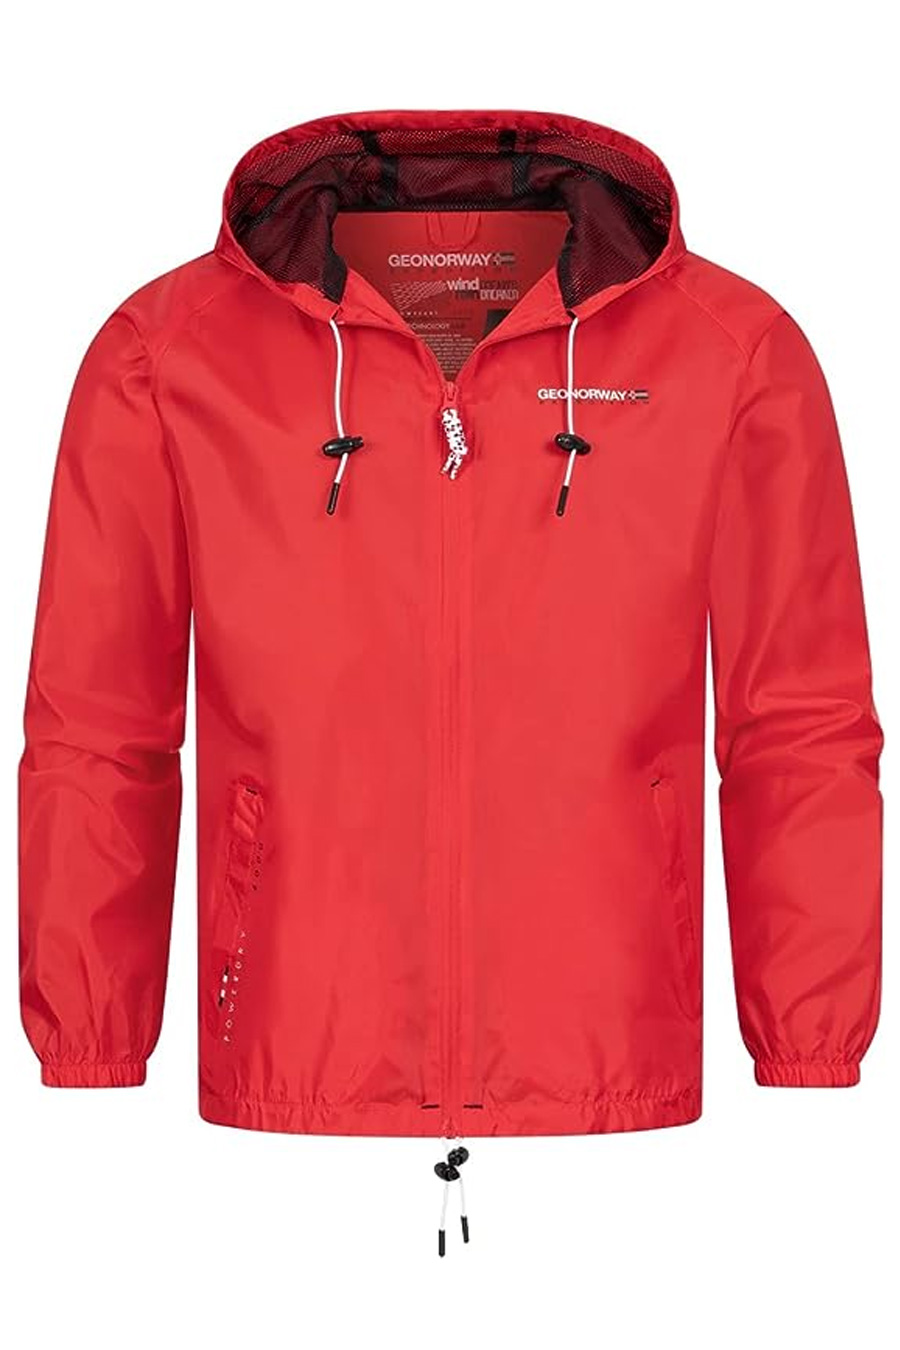 Lietpaltis GEOGRAPHICAL NORWAY BOAT-Red